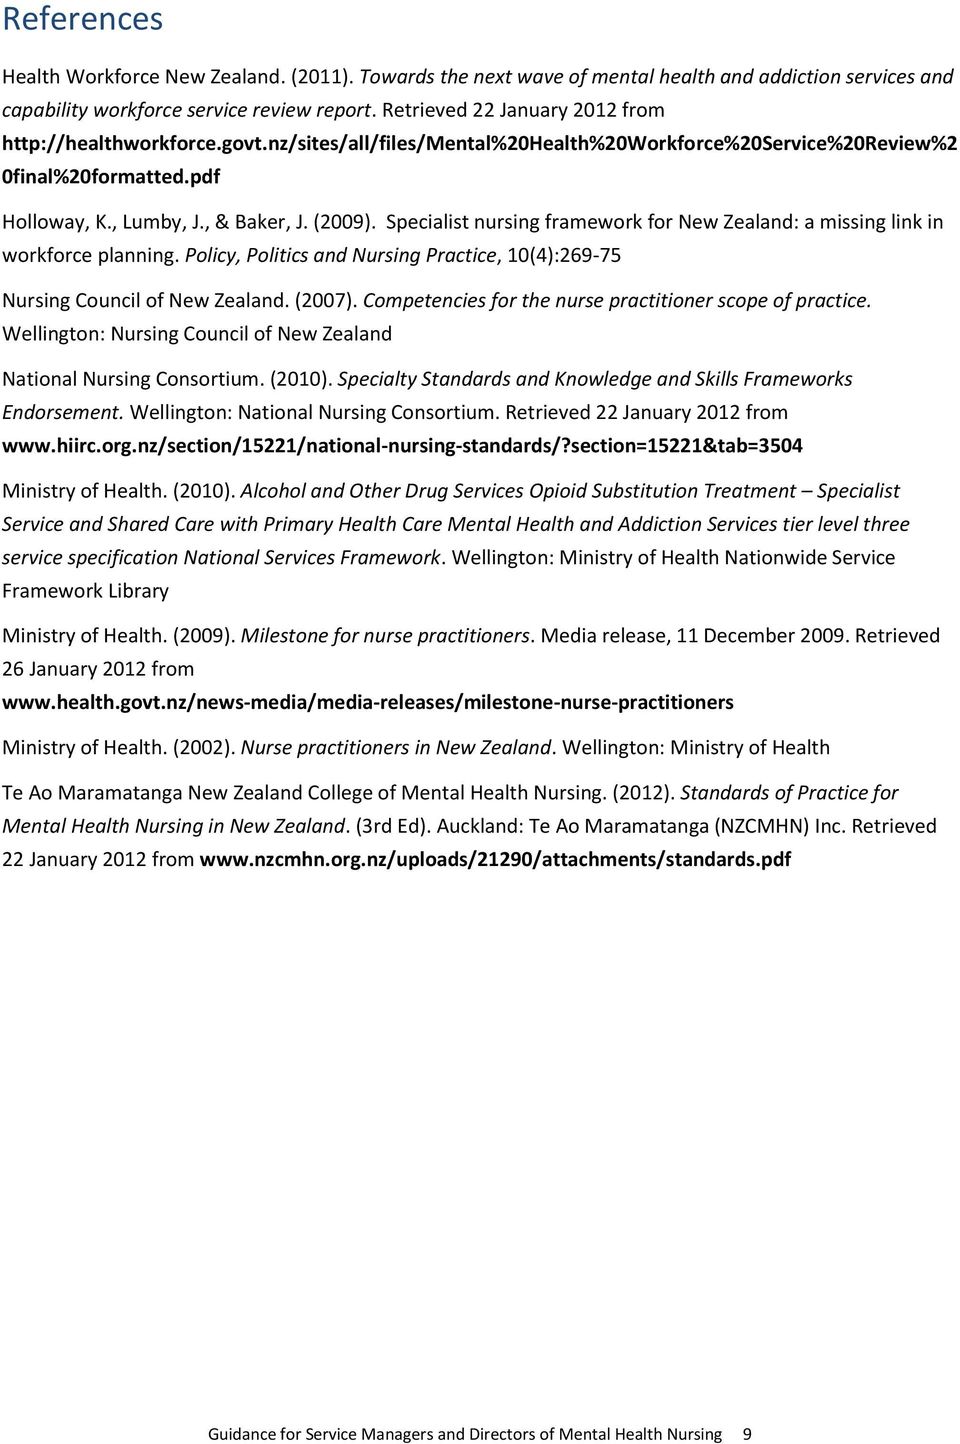 Specialist nursing framework for New Zealand: a missing link in workforce planning. Policy, Politics and Nursing Practice, 10(4):269-75 Nursing Council of New Zealand. (2007).